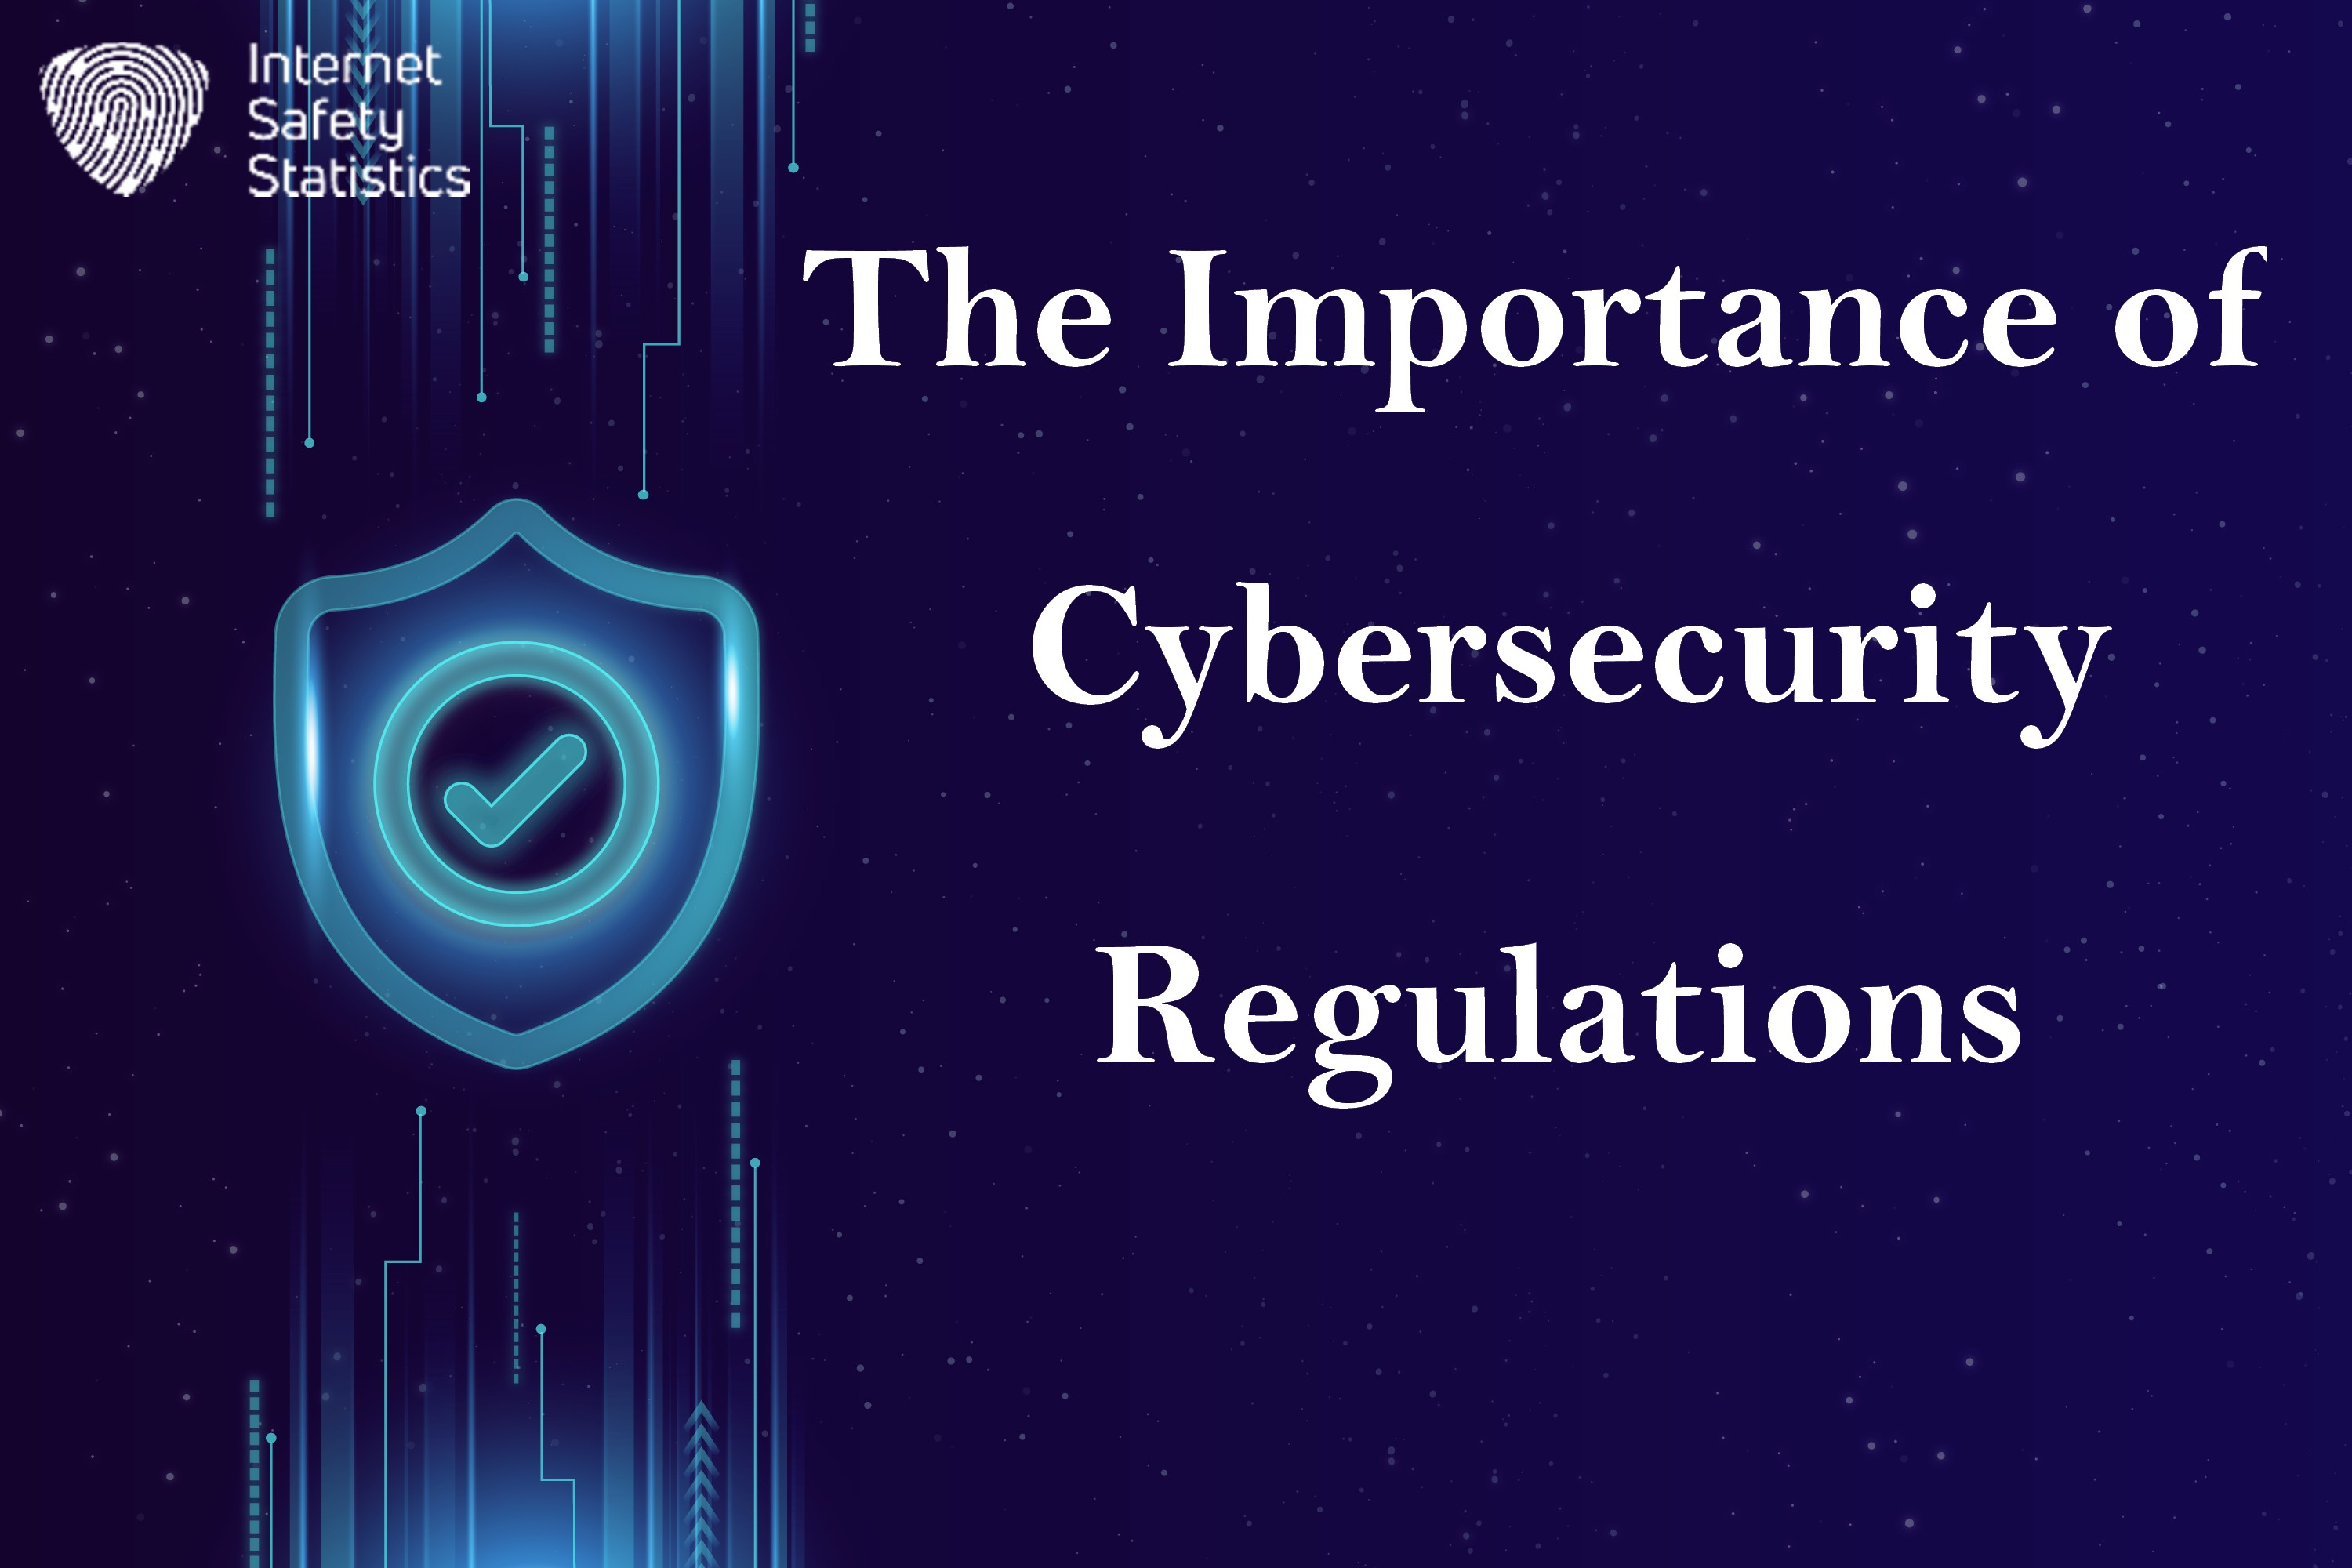 The Importance of Cybersecurity Regulations